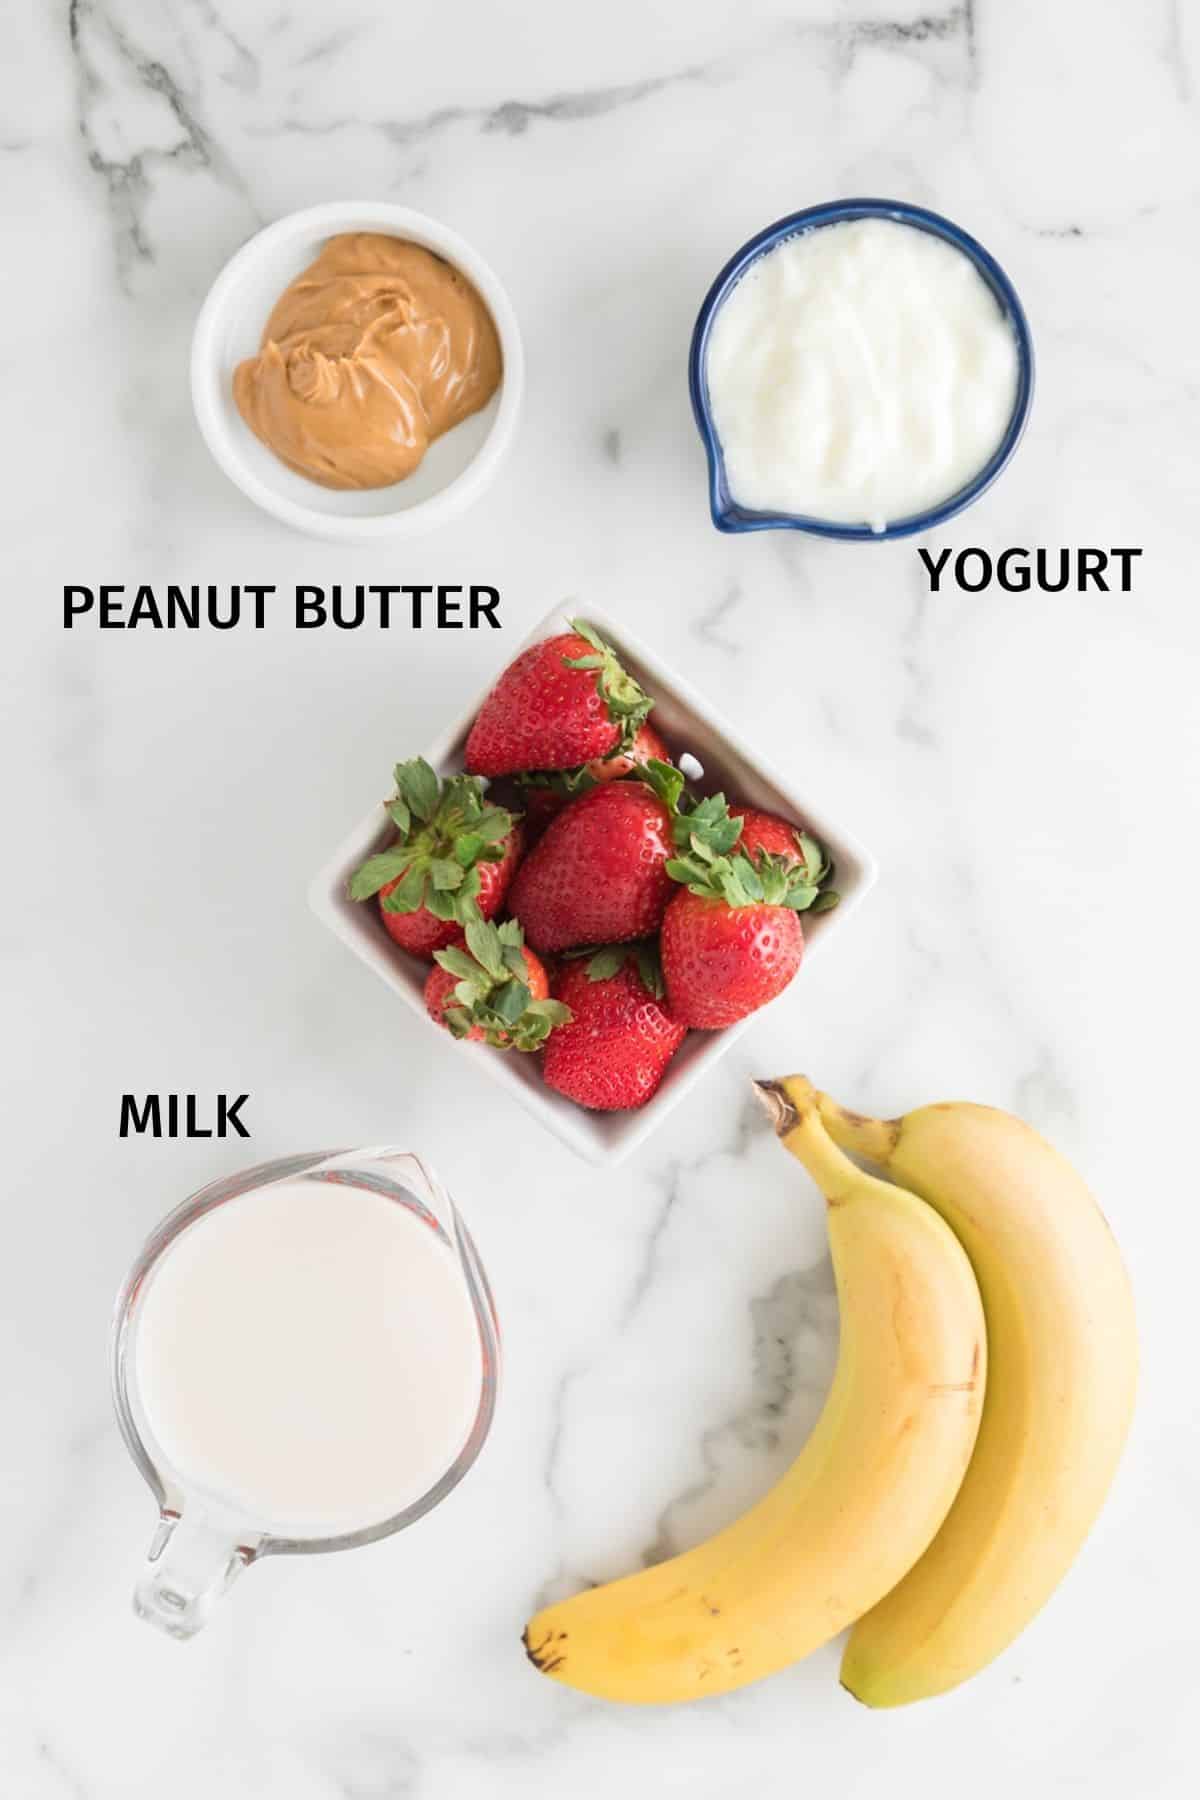 Ingredients for a strawberry banana peanut butter smoothie in small bowls on a white surface.